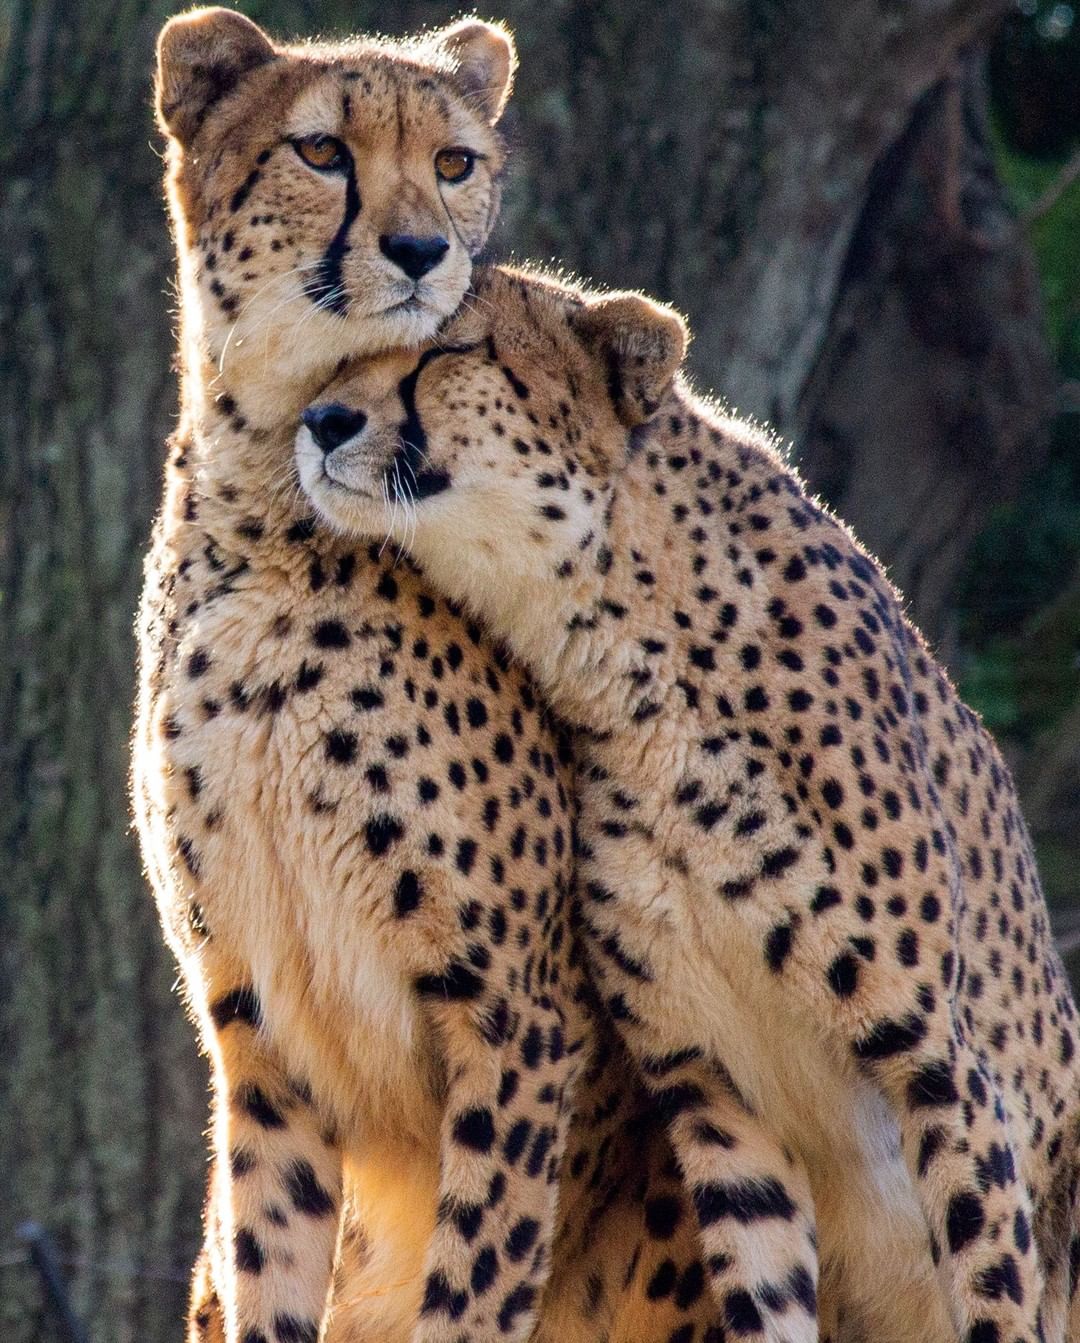 Two cheetahs nuzzling each other. Photo by Instagram user @philadelphiazoo